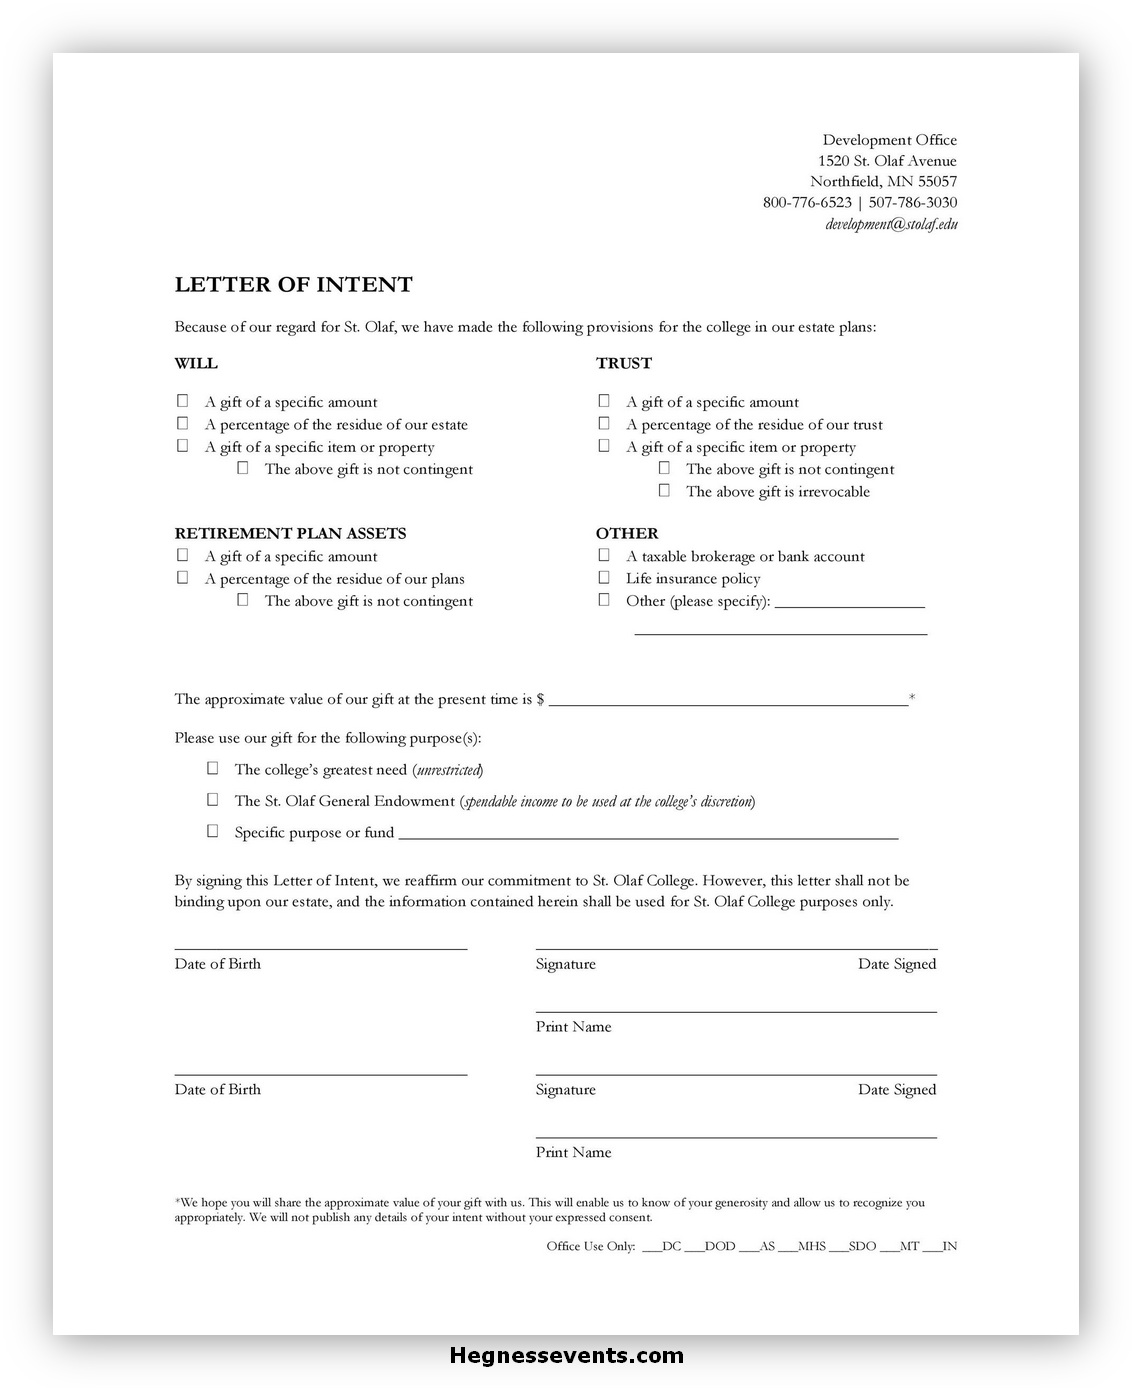 Sample Letter of Intent 05